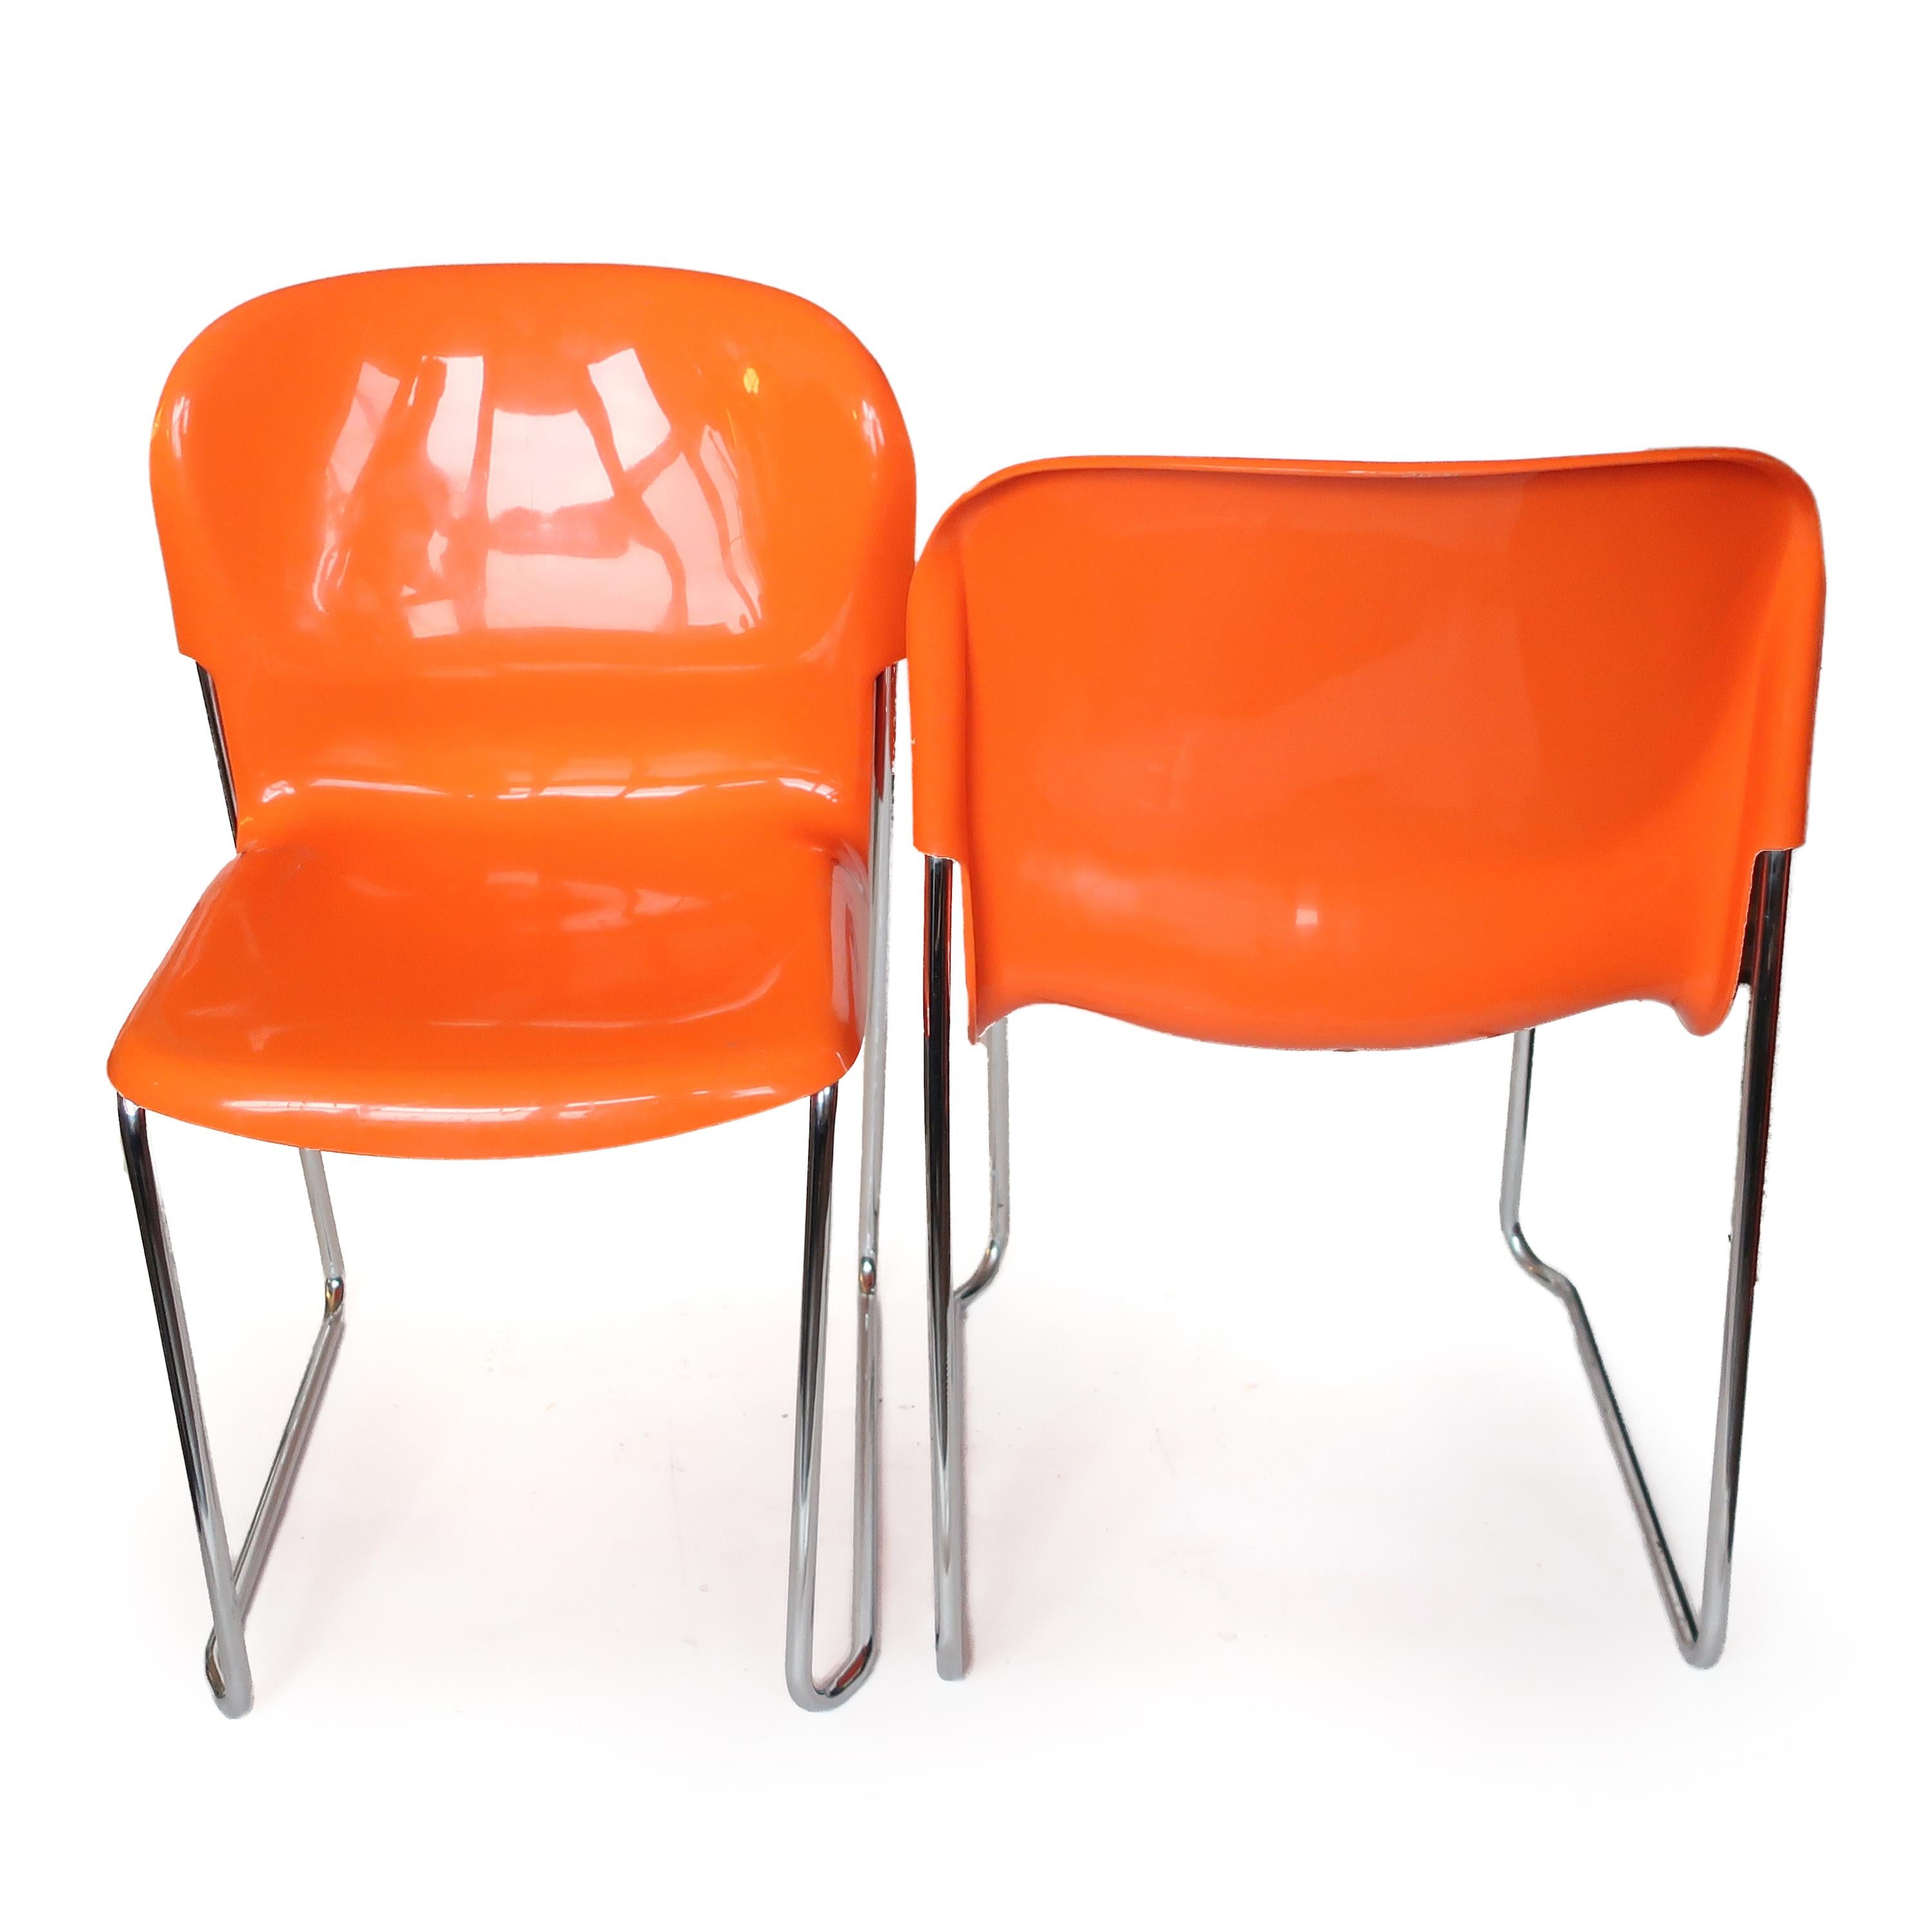 Pair of Orange SM 400 Swing Chairs by Gerd Lange for Drabert In Good Condition For Sale In Brooklyn, NY